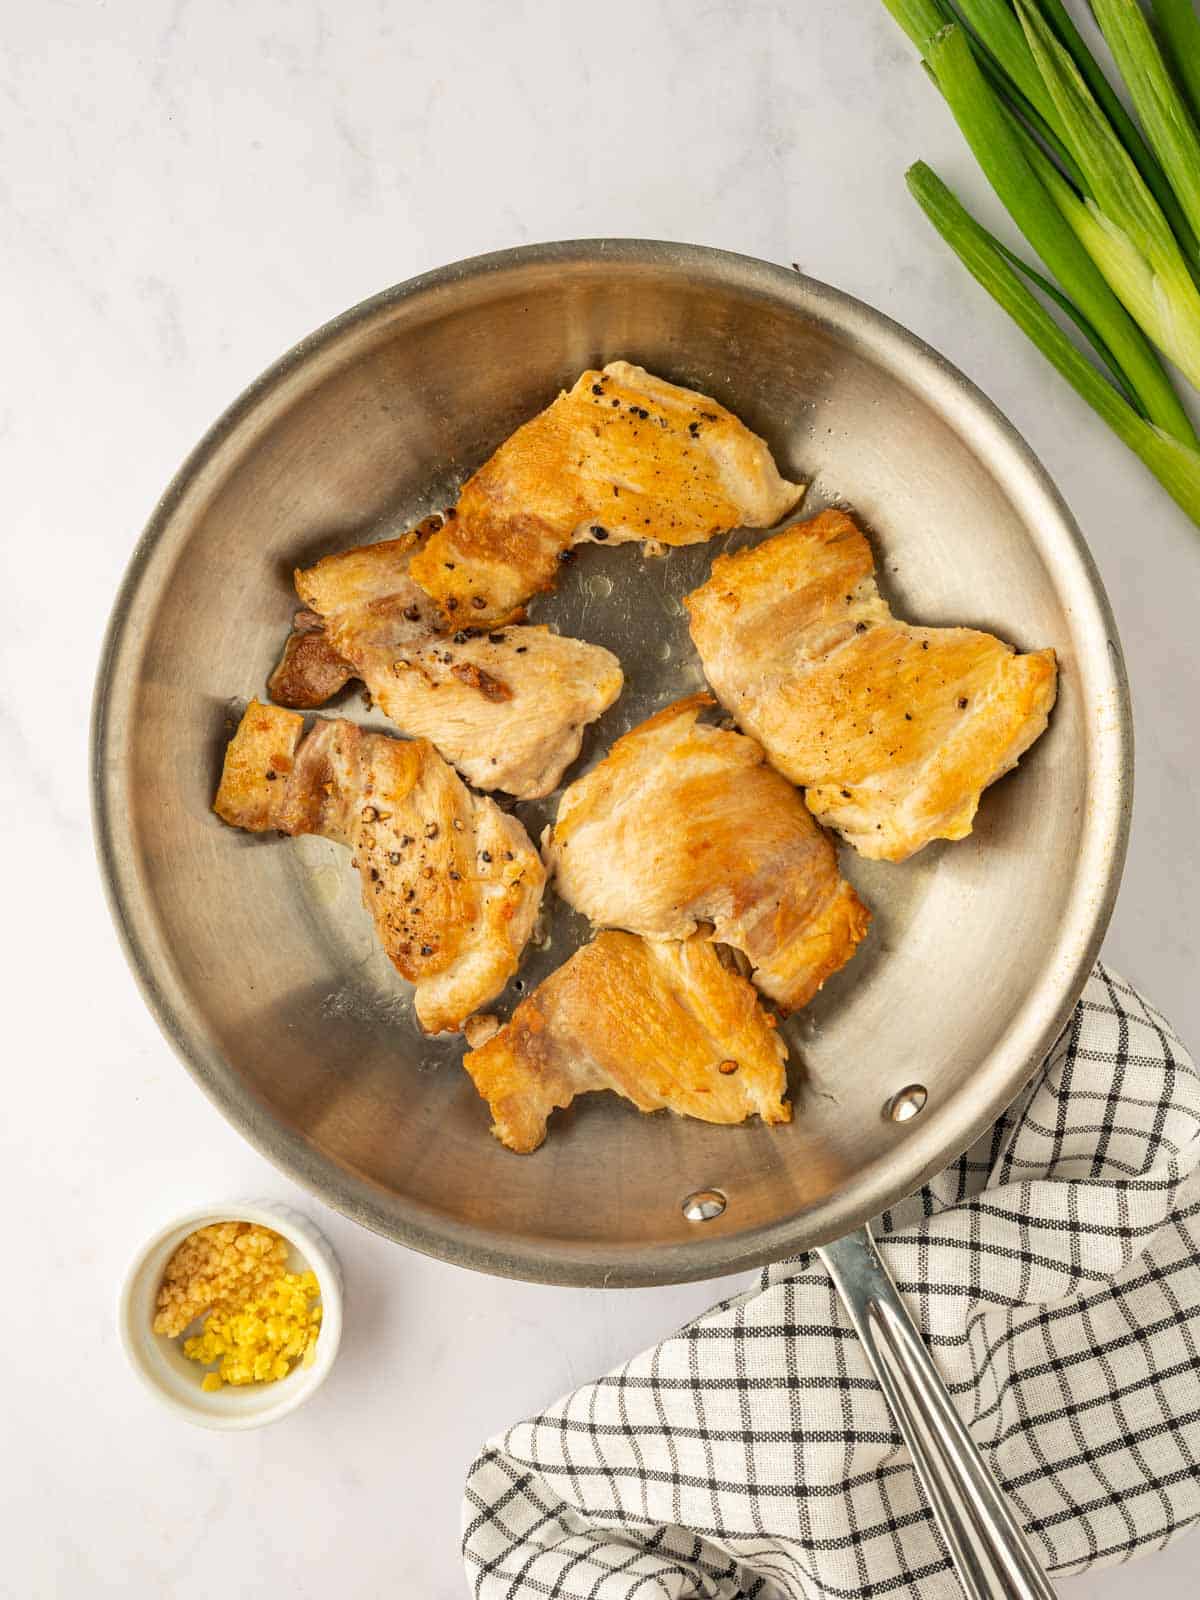 Chicken thighs are seared in a skillet.